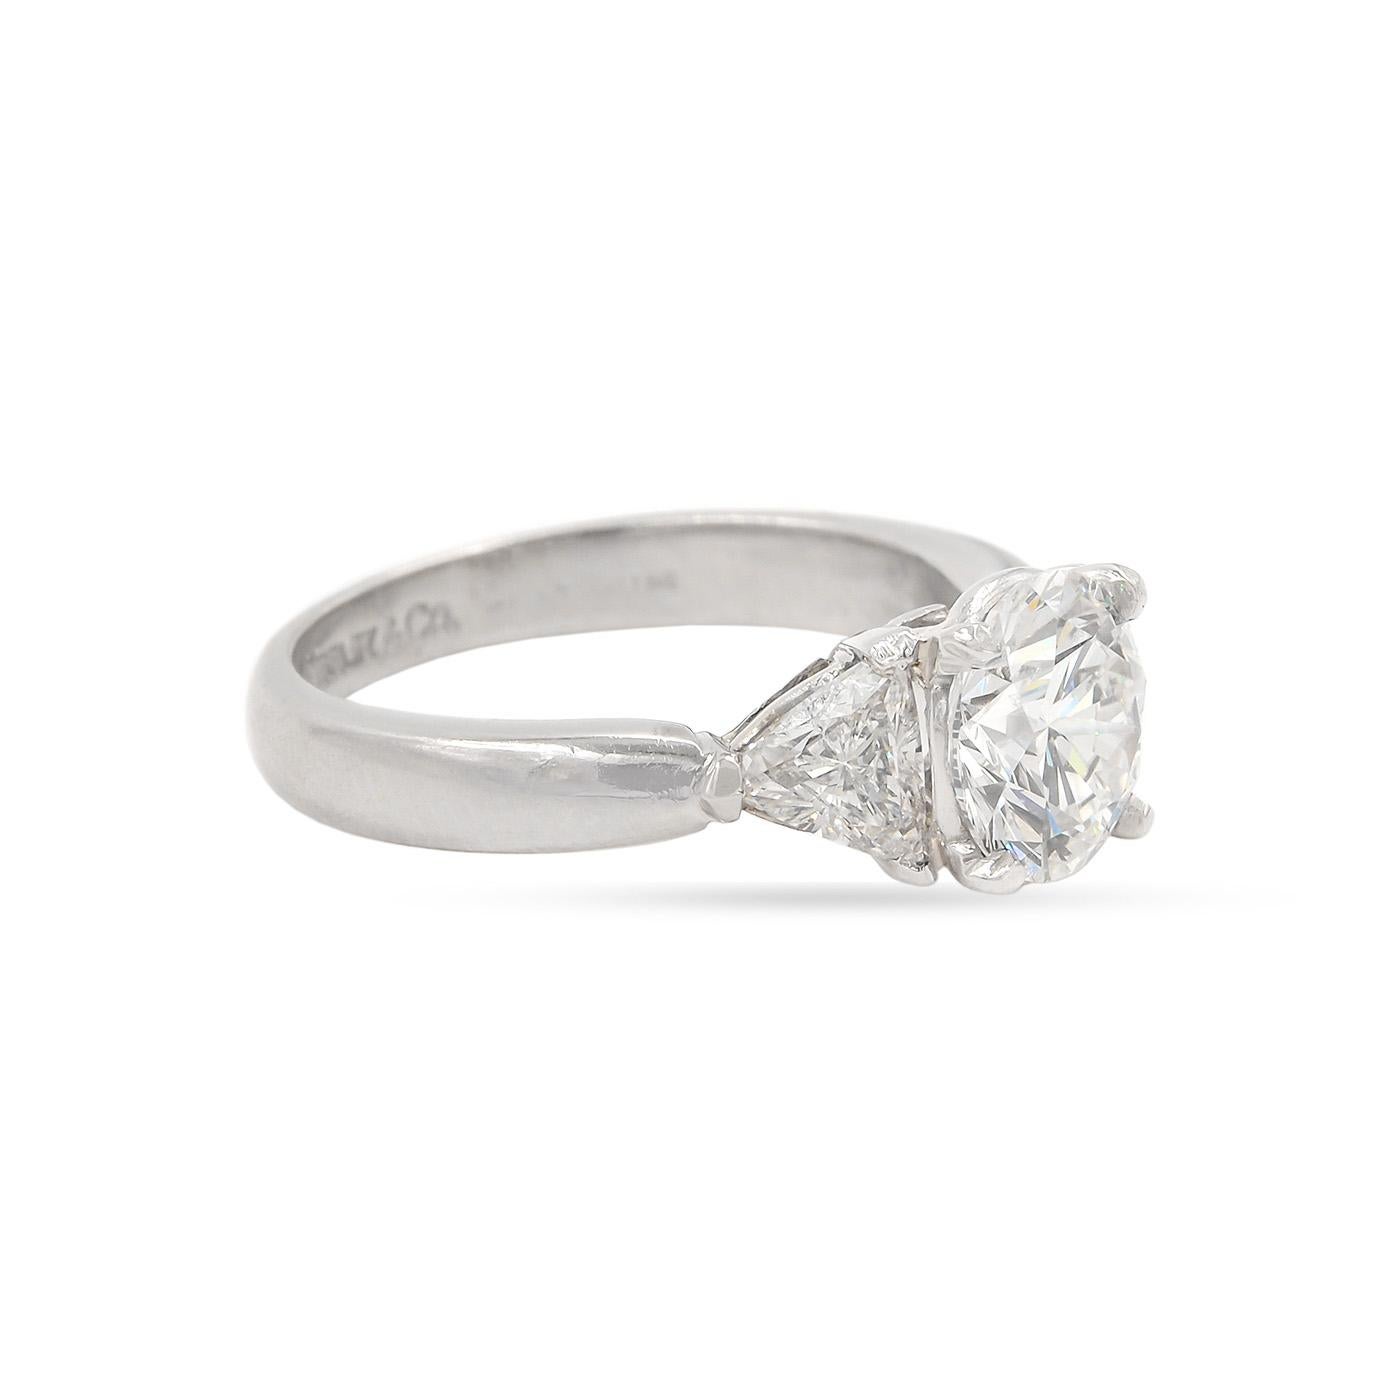 A classic 3-Stone engagement ring by Tiffany & Co. composed of platinum. Featuring a 1.31 Carat Round Brilliant Cut Diamond, GIA certified F color & VVS2 clarity. Flanked by 2 Trilliant Cut diamonds set on the shoulders, weighing approximately 0.61